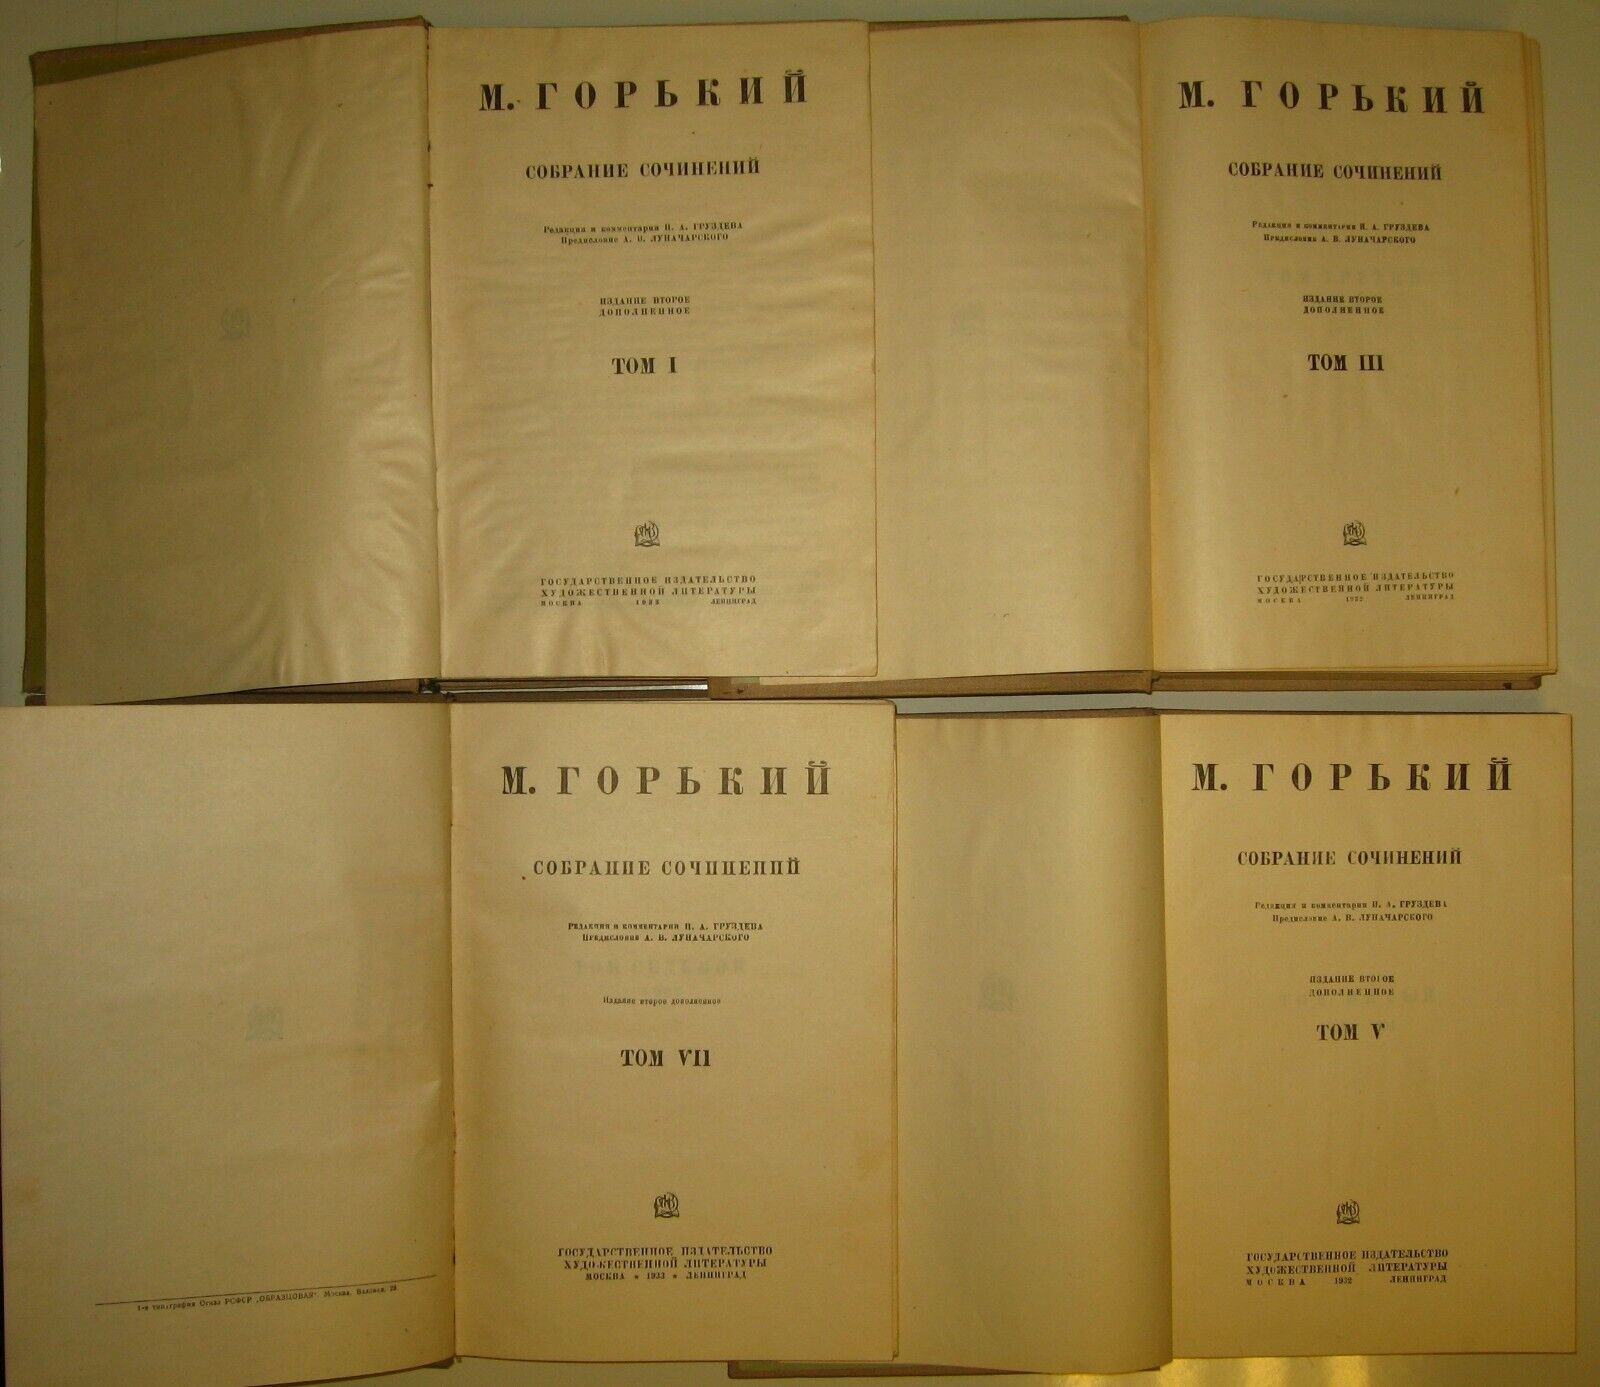 10839.Antique Russian Book: Gorky. Collected works complete set in 25 volumes.1933-34